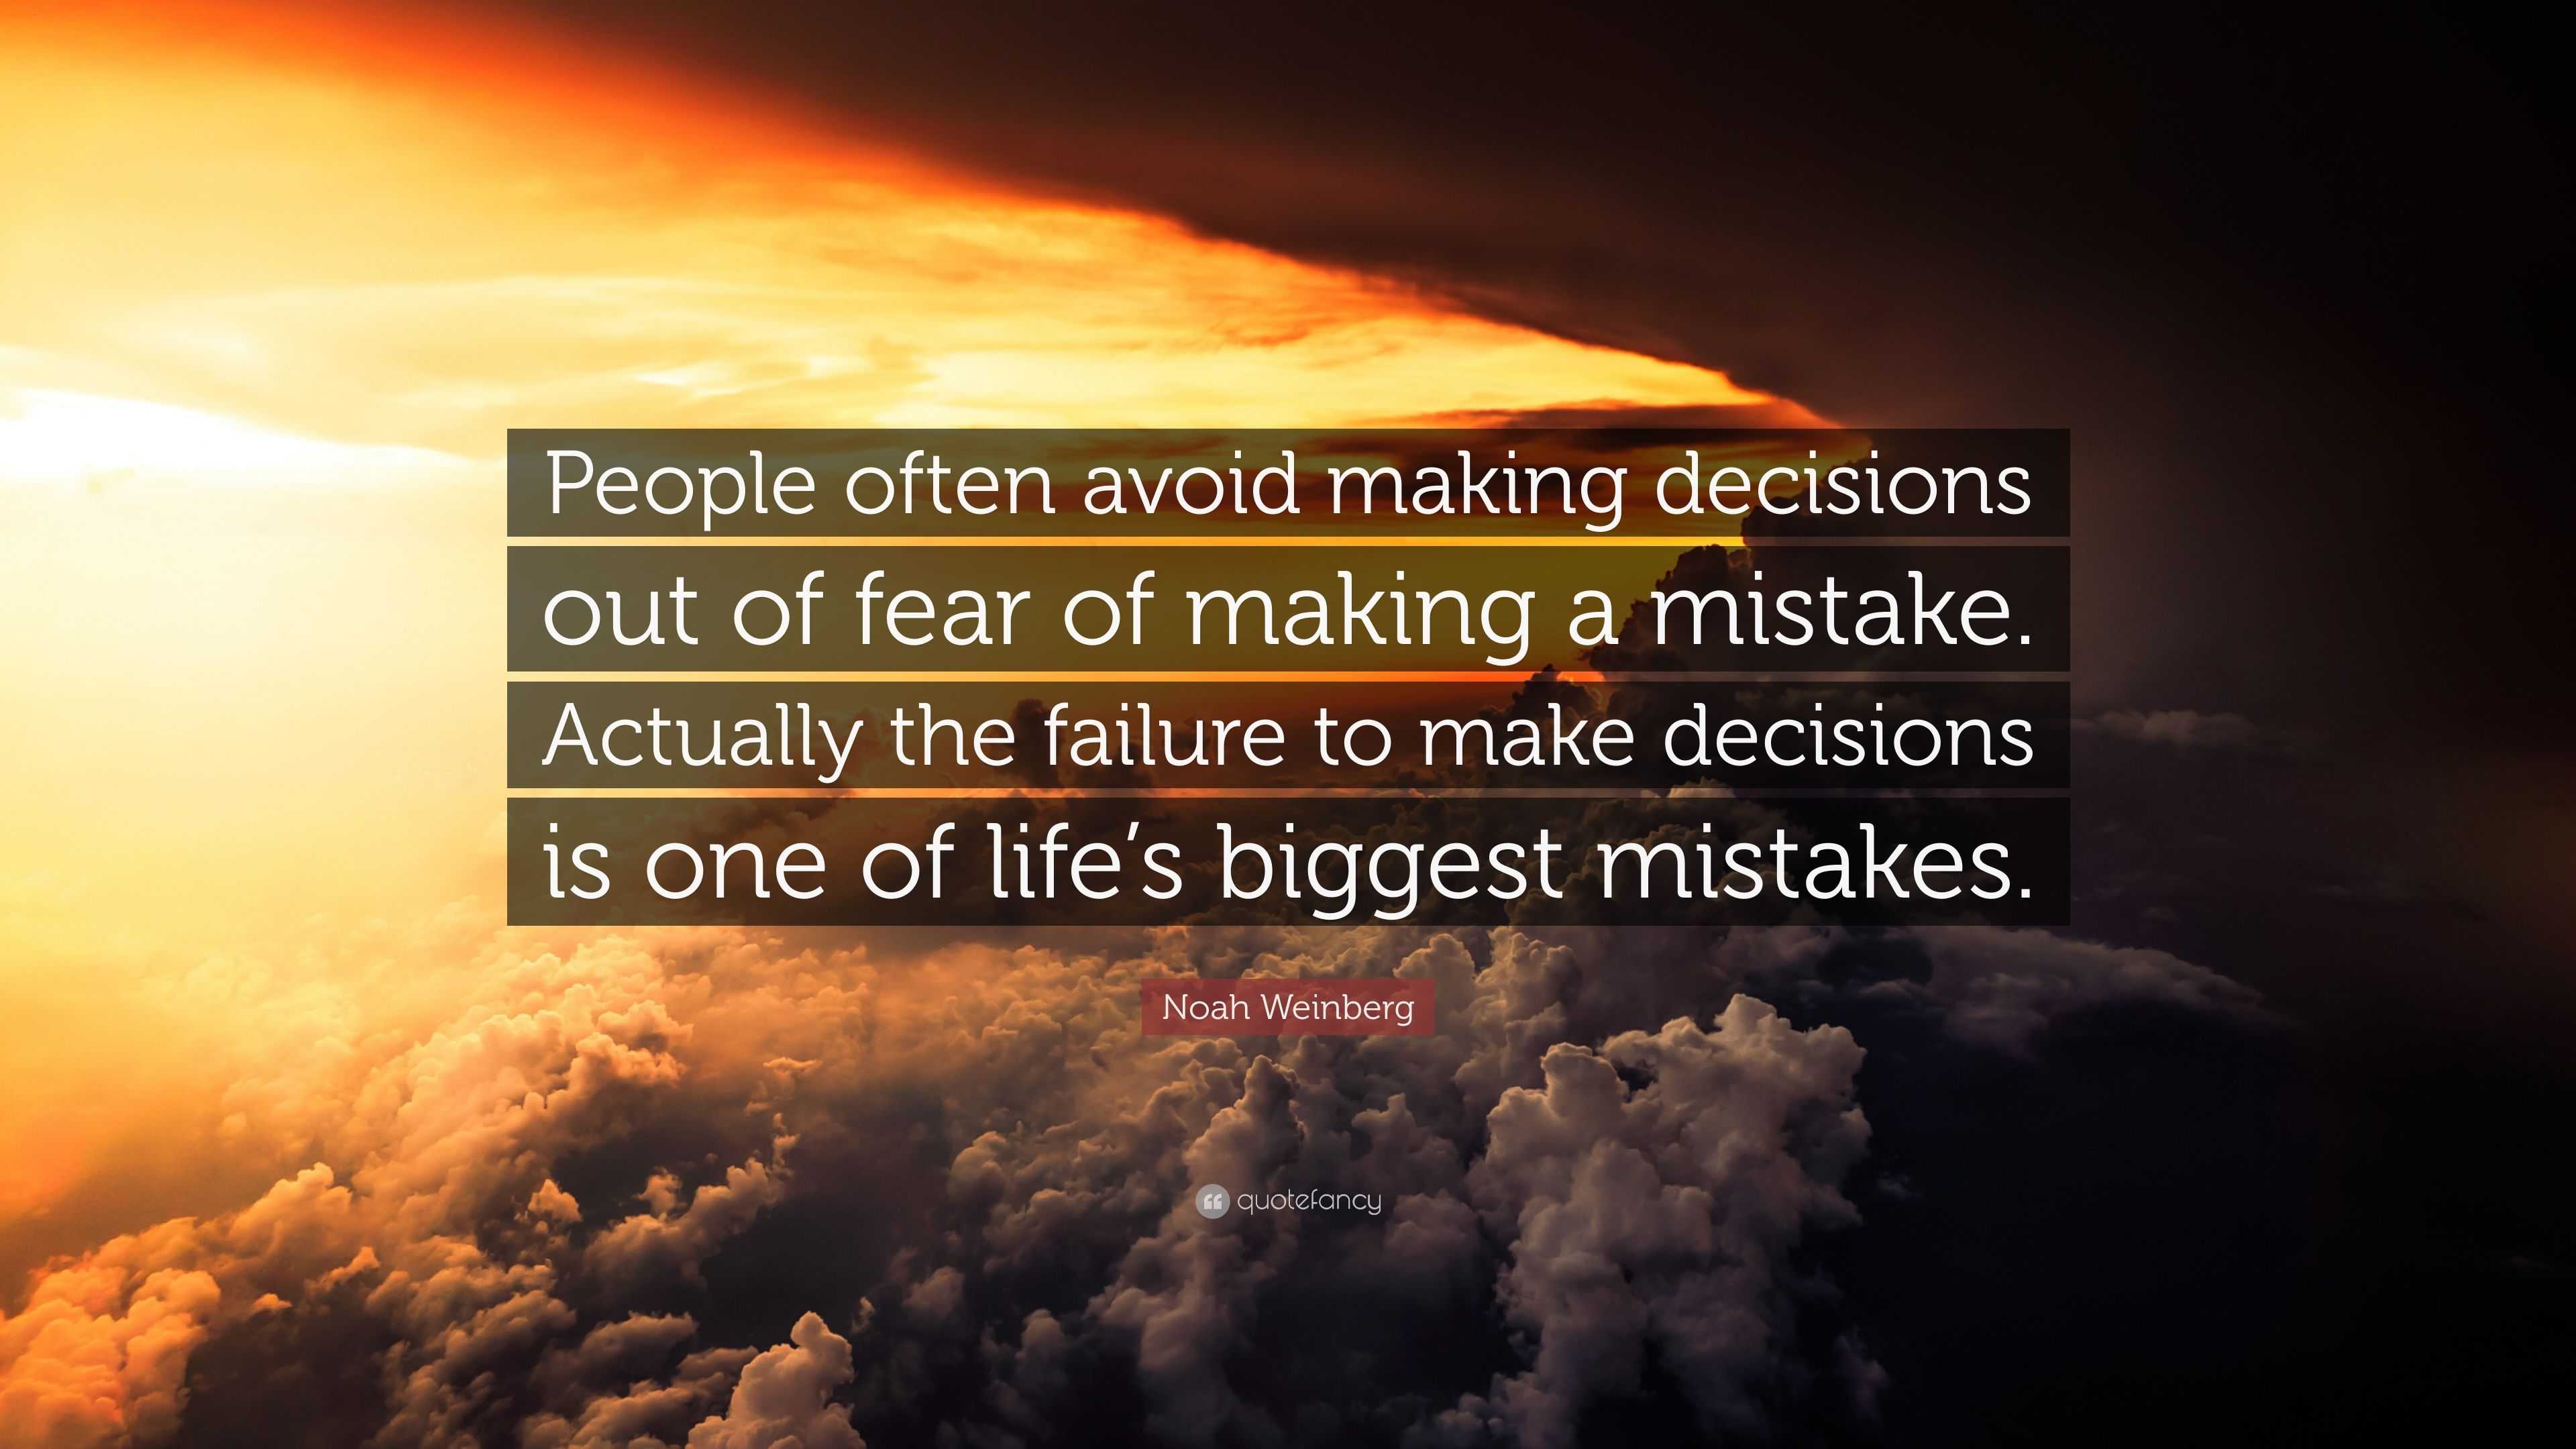 Noah Weinberg Quote: “People often avoid making decisions out of fear